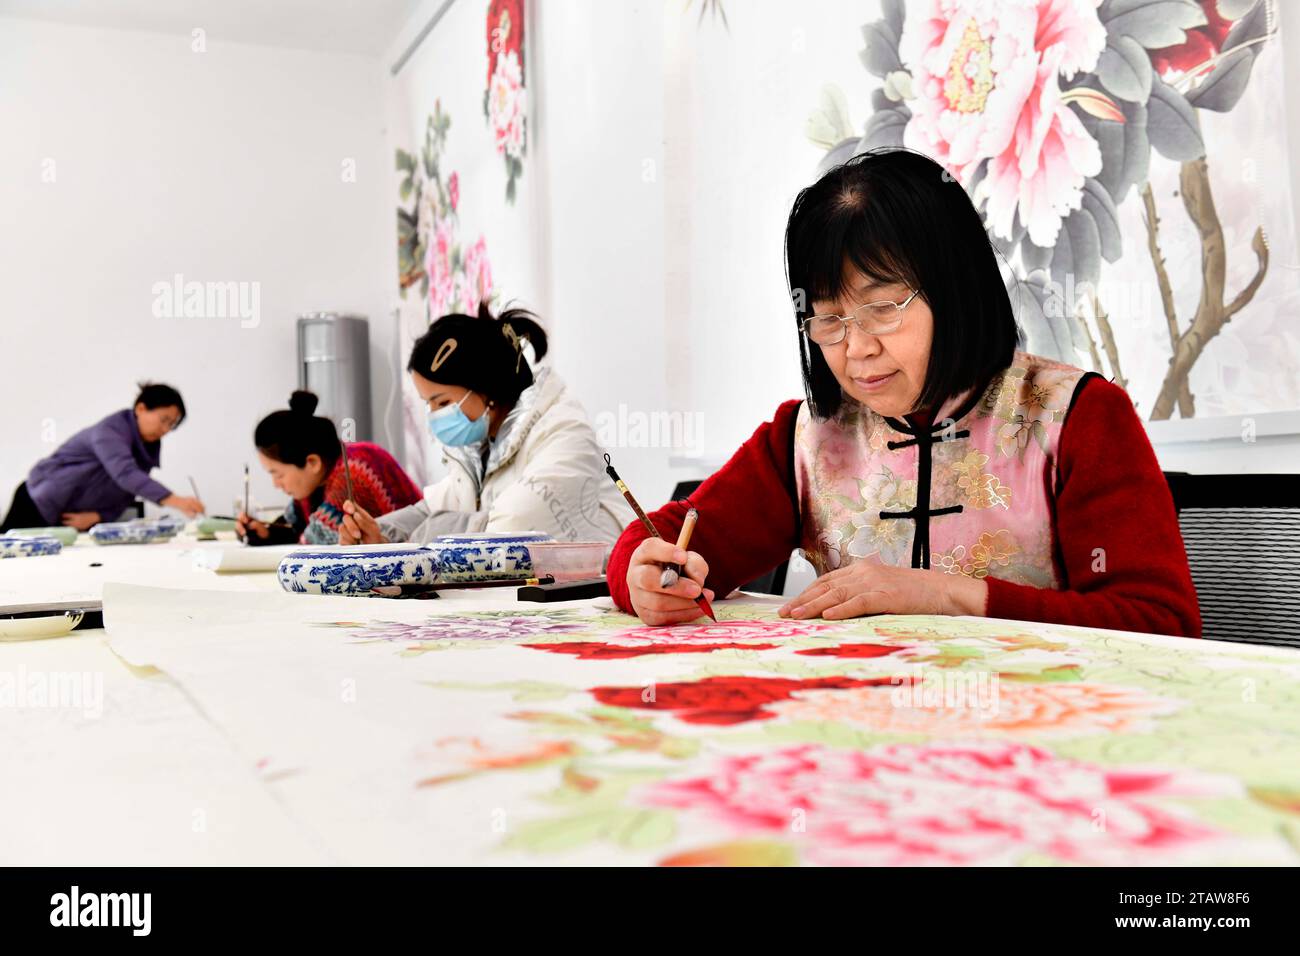 Juye, Heze City of east China's Shandong Province. 2nd Dec, 2023. Farmers paint peony-themed realistic paintings at a studio in Juye County, Heze City of east China's Shandong Province, Dec. 2, 2023. Juye County is located in Heze, a city known for the cultivation of peonies. As a provincial intangible cultural heritage, peony-themed realistic painting has not only subsidized locals' incomes but also become a respected pastime within the community. There are over 20,000 people engaged in painting industry at present. Credit: Guo Xulei/Xinhua/Alamy Live News Stock Photo